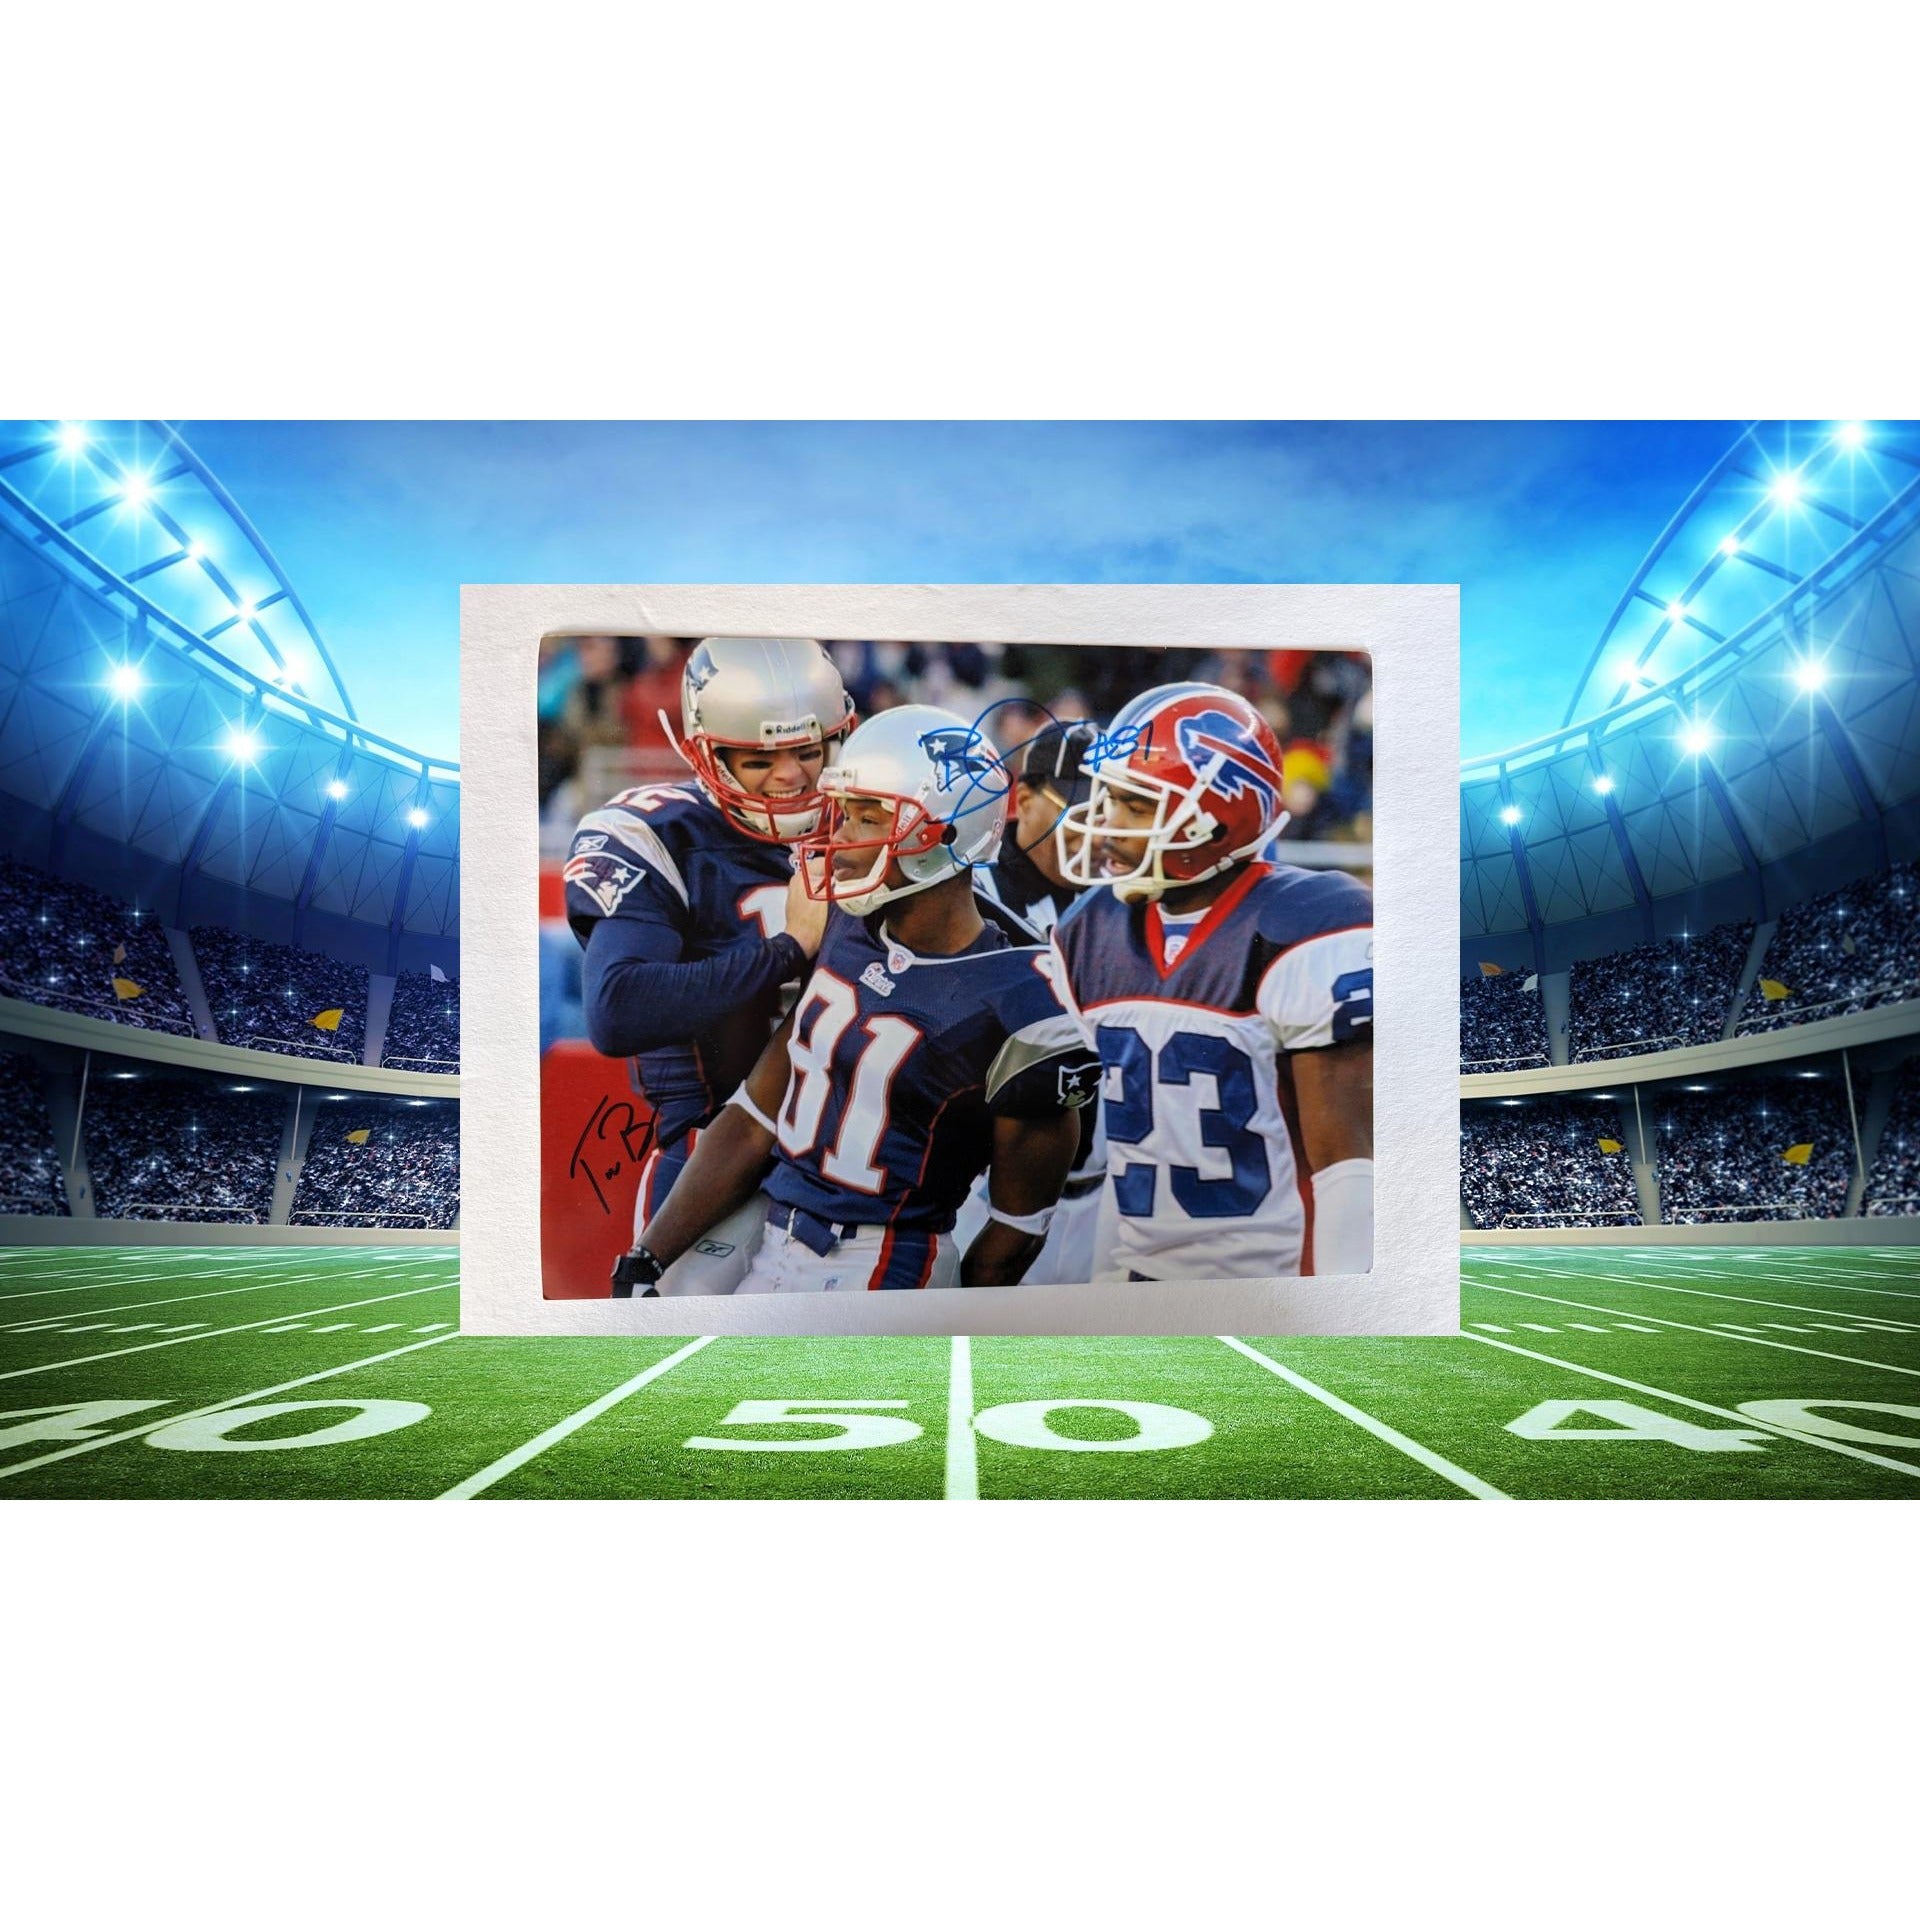 Deion Branch and Tom Brady New England Patriots Super Bowl MVPs 8x10 photo signed with proof